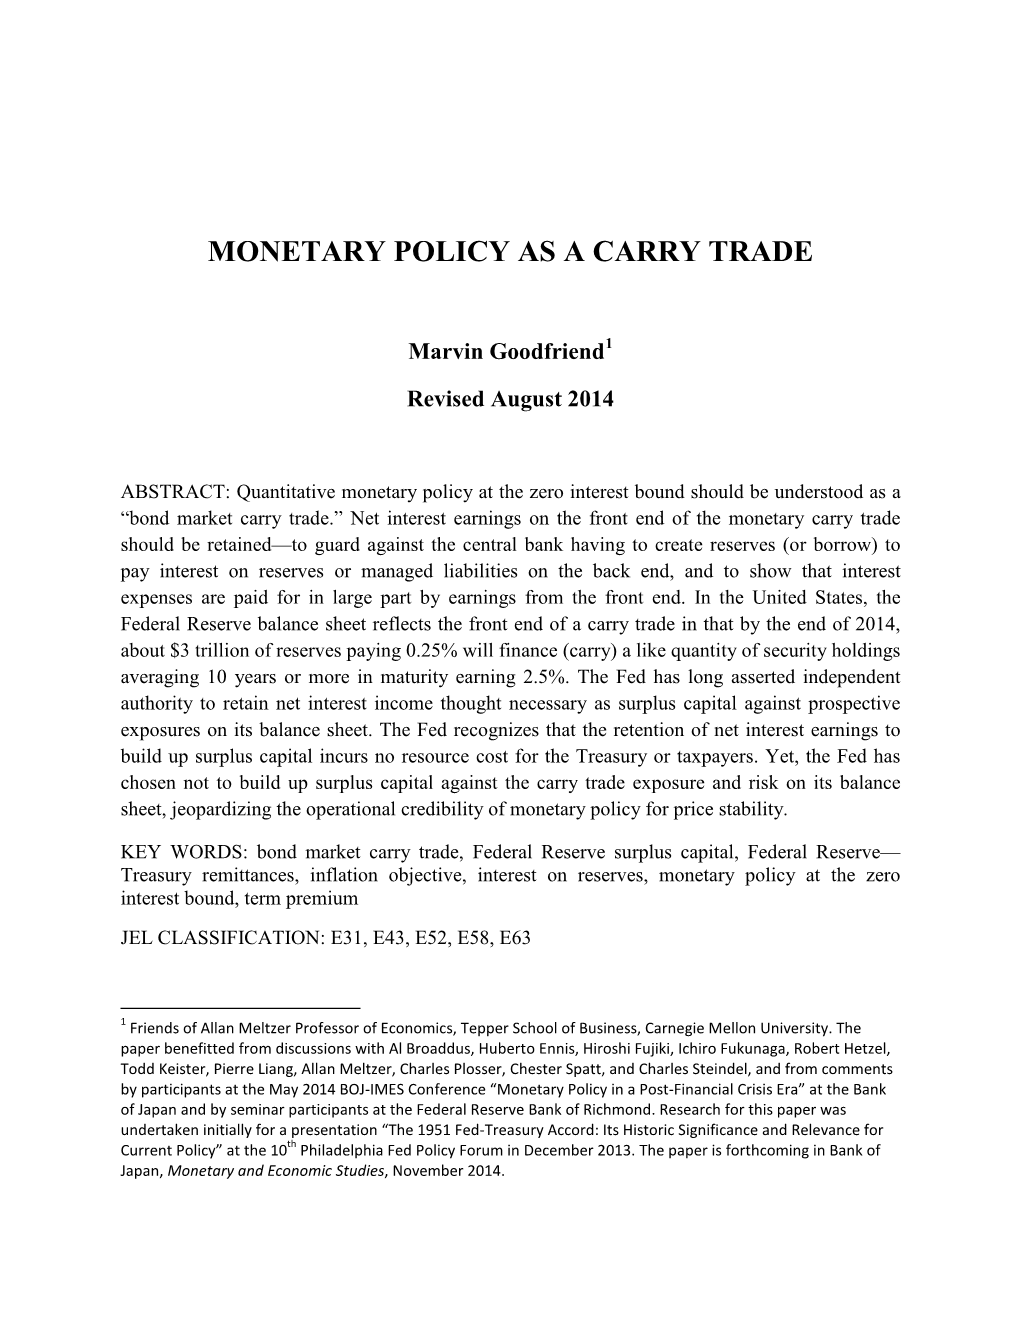 PDF Marvin Goodfriend: Monetary Policy As A